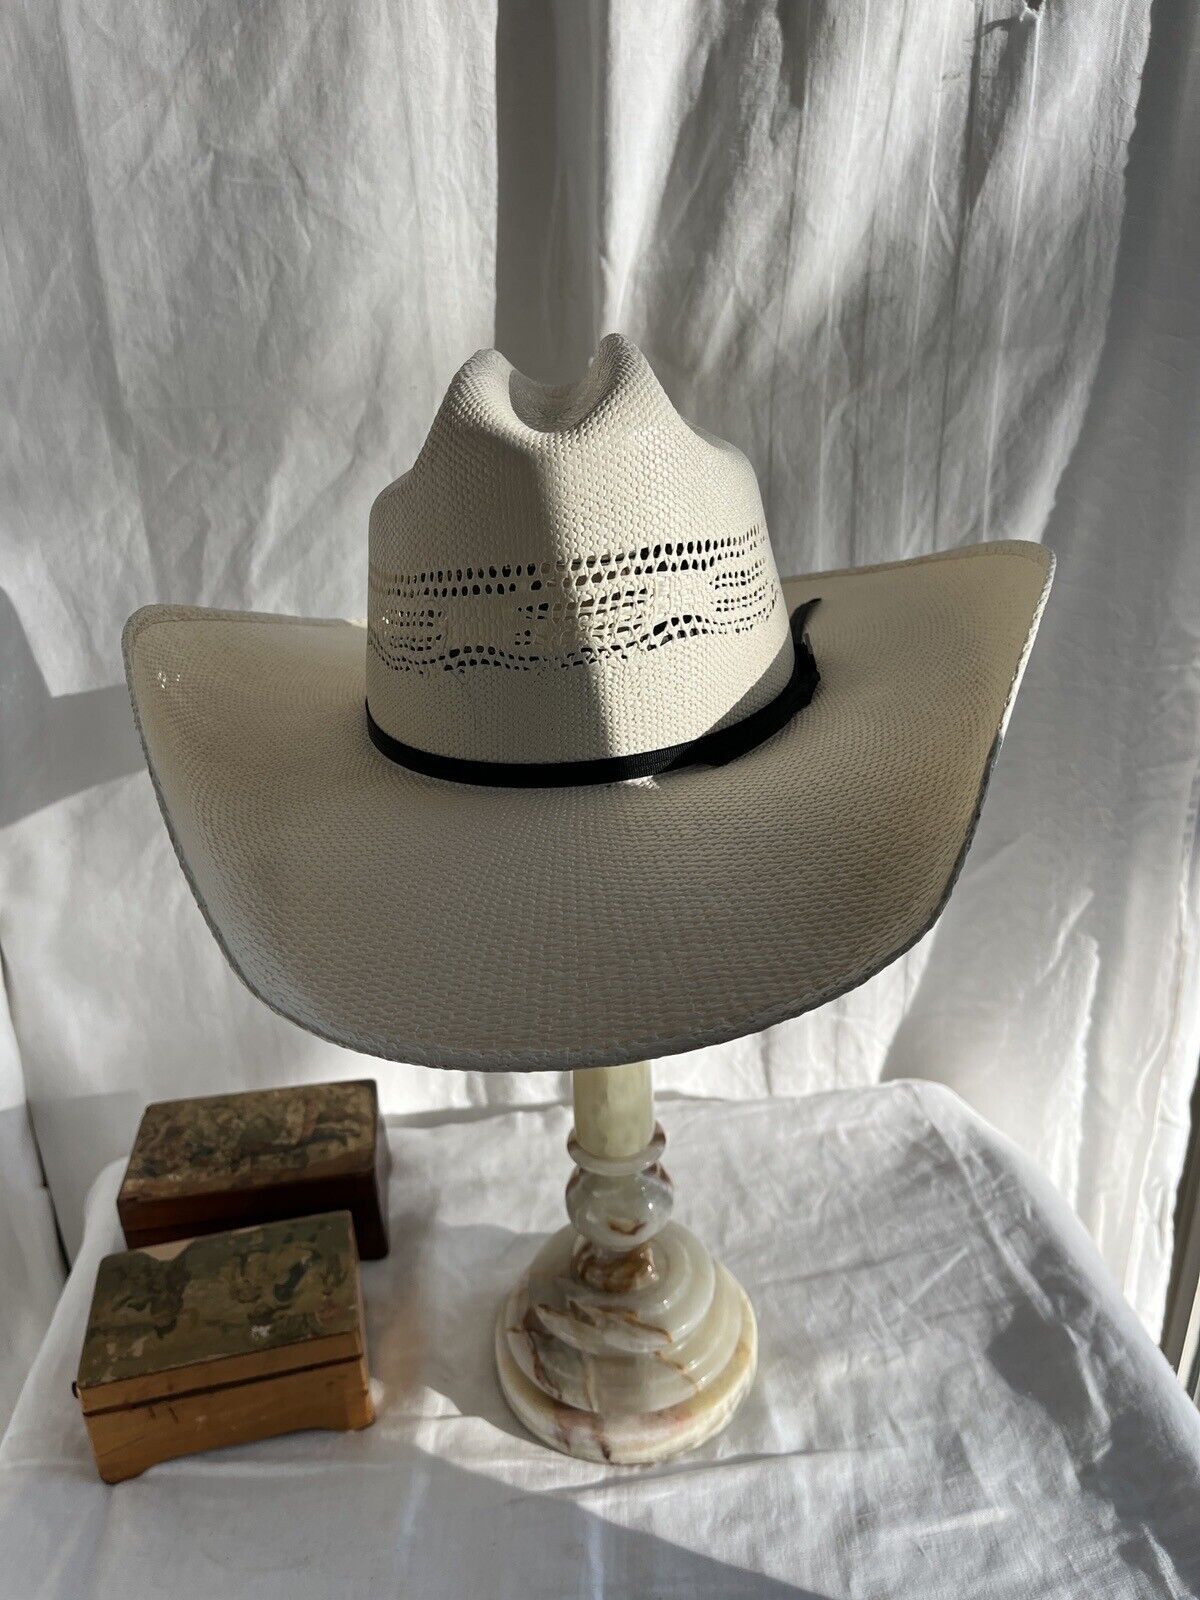 Lone Star  28BN-Rodeo straw cowboy hat size 7 - image 3